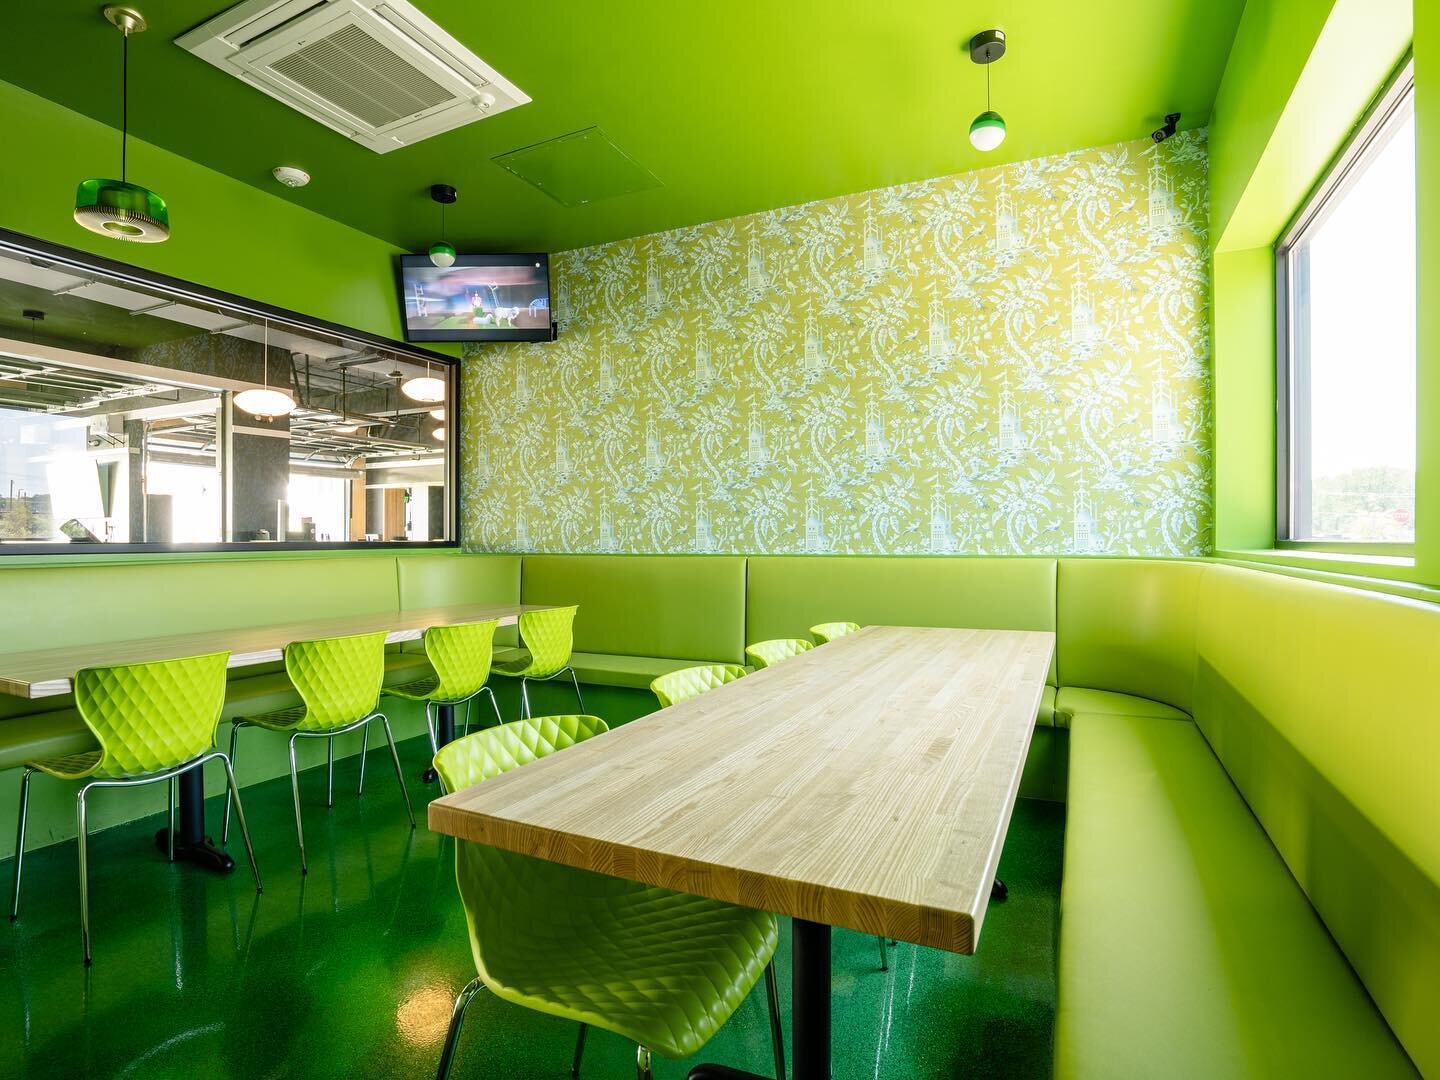 Cowabunga dude. 💚 Get the crew  together for karaoke this weekend. The Seoul Food - Mill District GREEN ROOM fits up to 30 people and would be a great spot to show off your cool #TMNTmovie moves. 
.
🎶🎤 Details - seoulfoodmeatcoclt.com/karaoke
.
#s